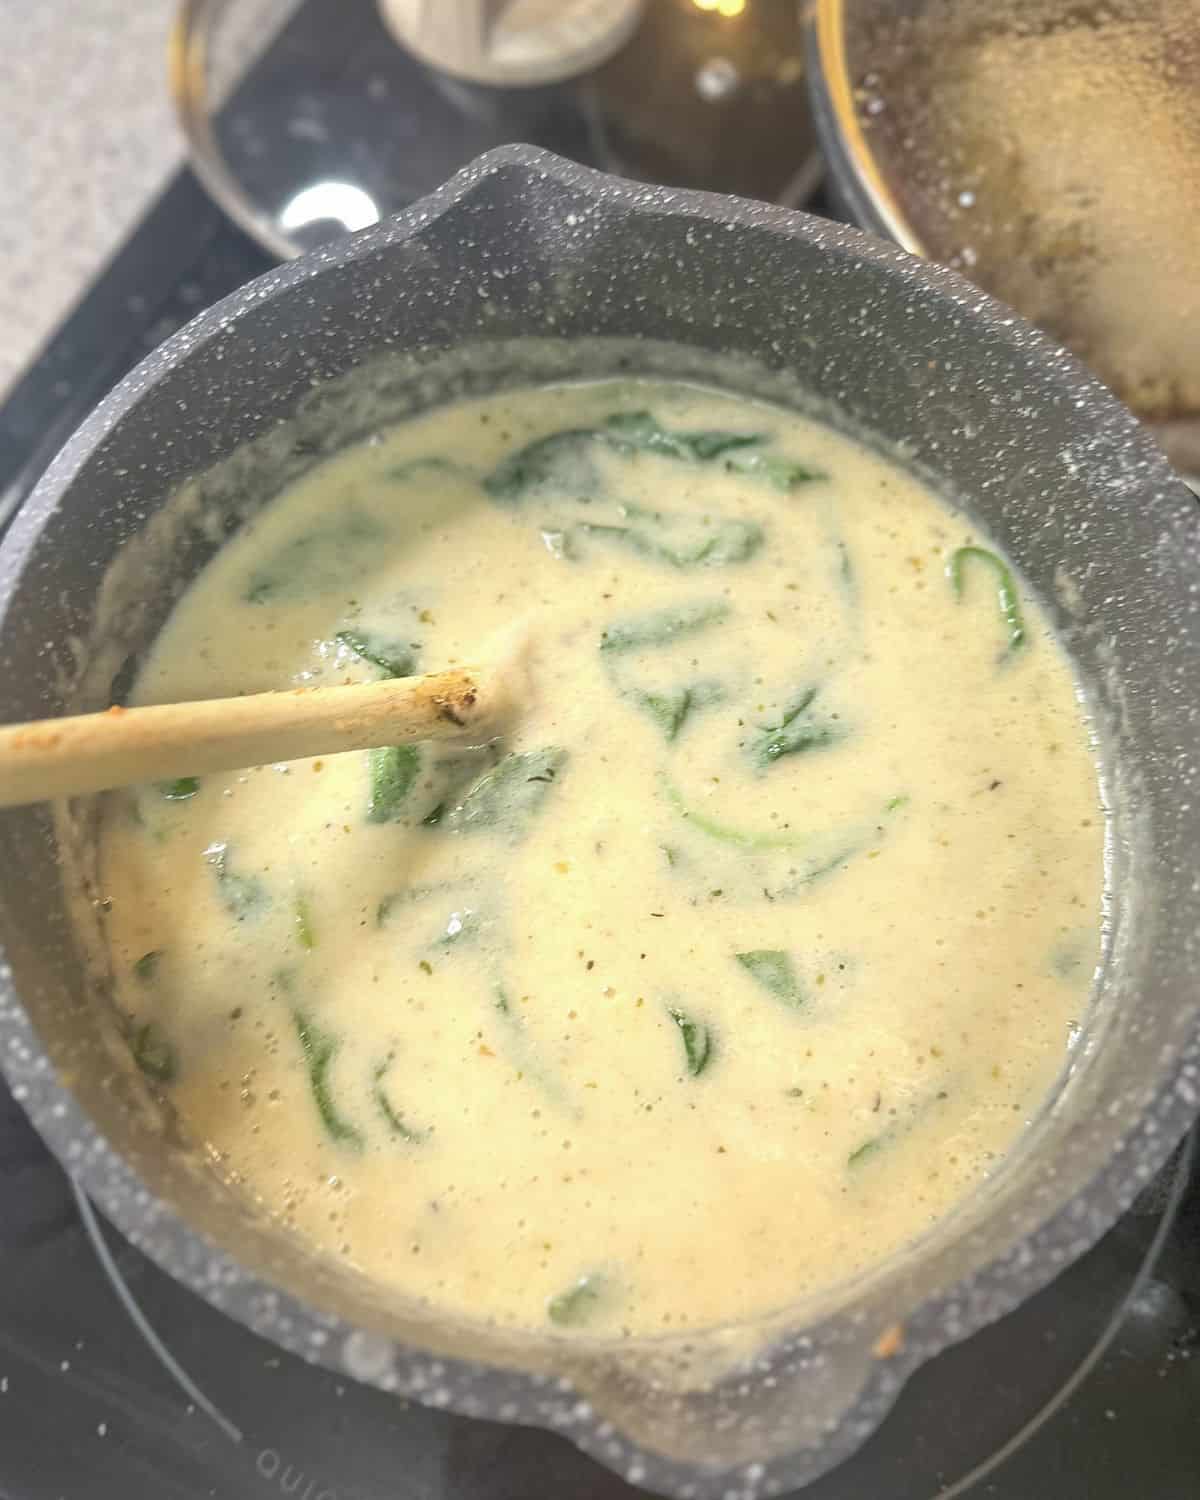 Creamy alfredo sauce cooking on a stovetop with some spices visible and wilted spinach being stirred with a wooden spoon.